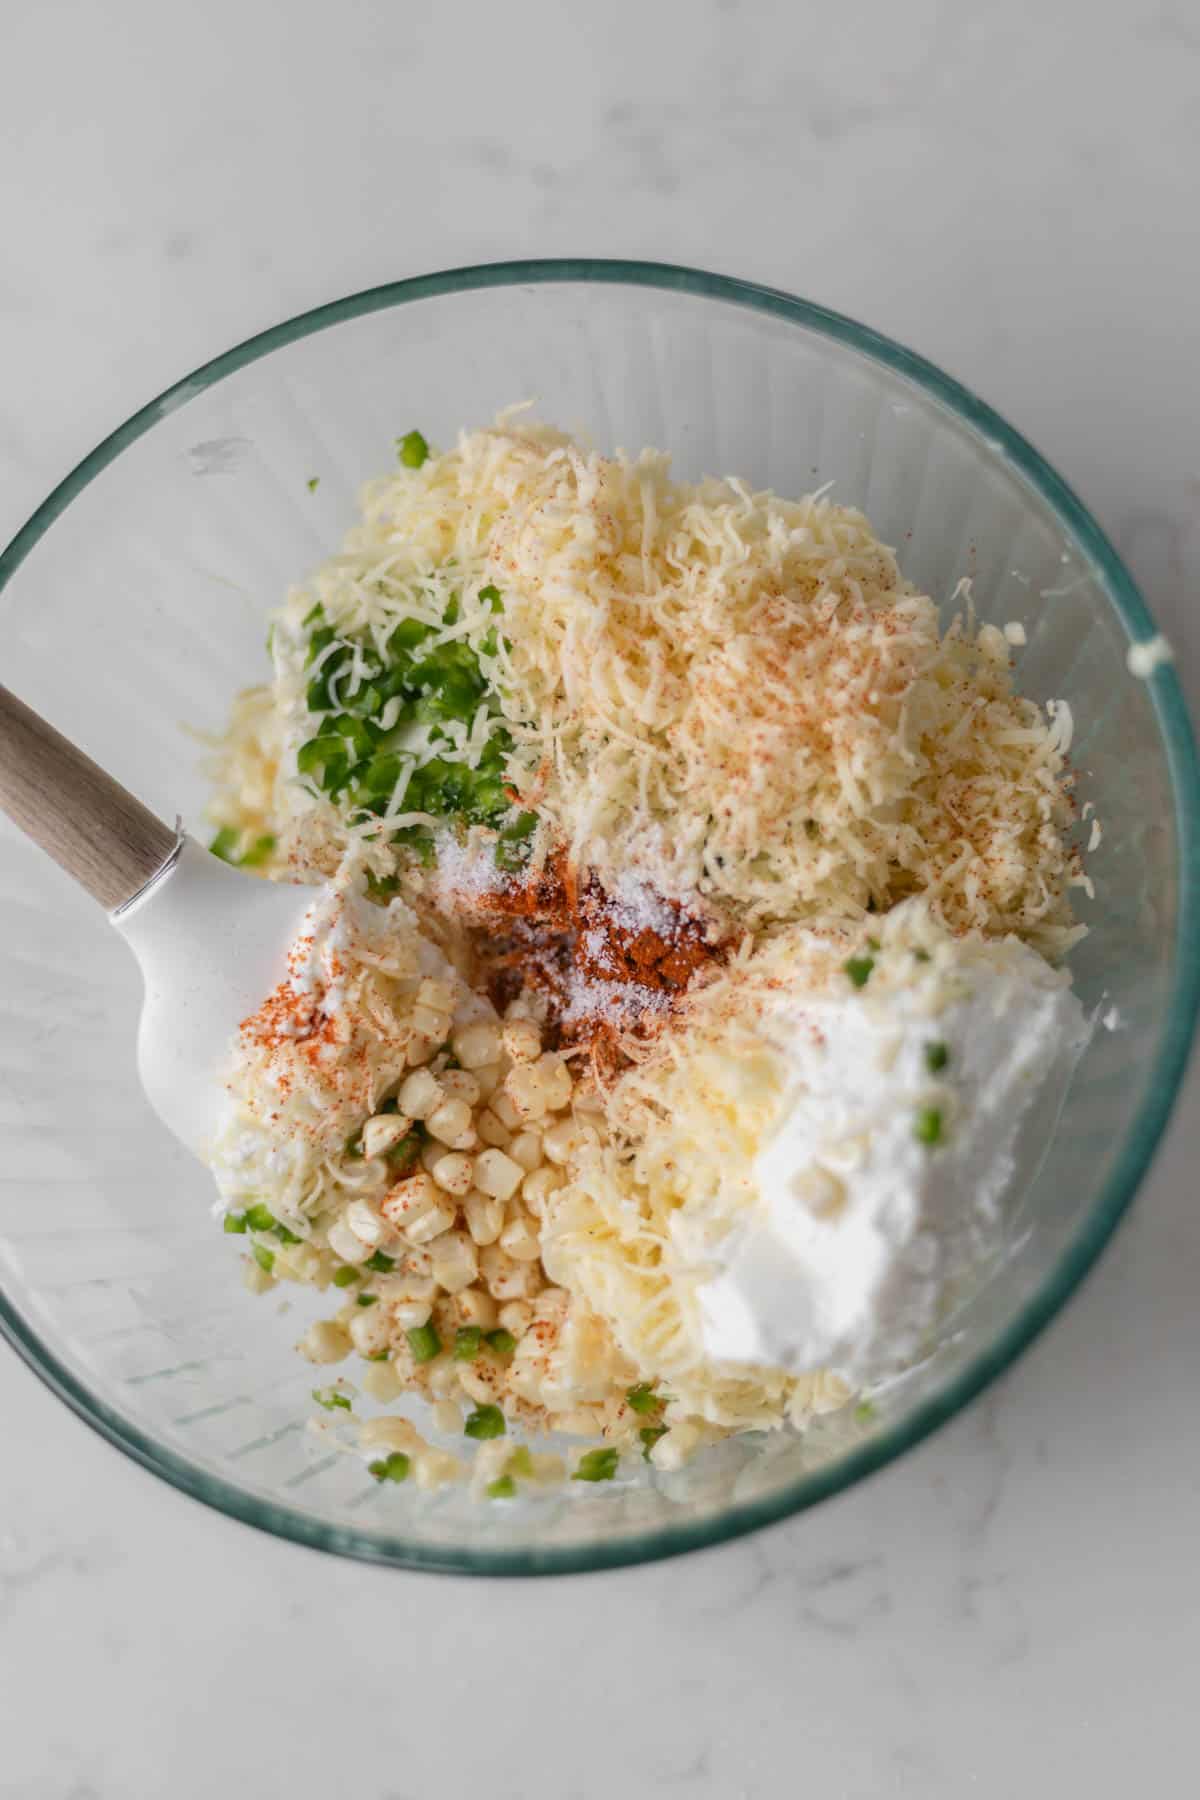 cheese, cream cheese, corn, jalapeno, greek yogurt, and chili powder in a glass bowl with a wooden spoon